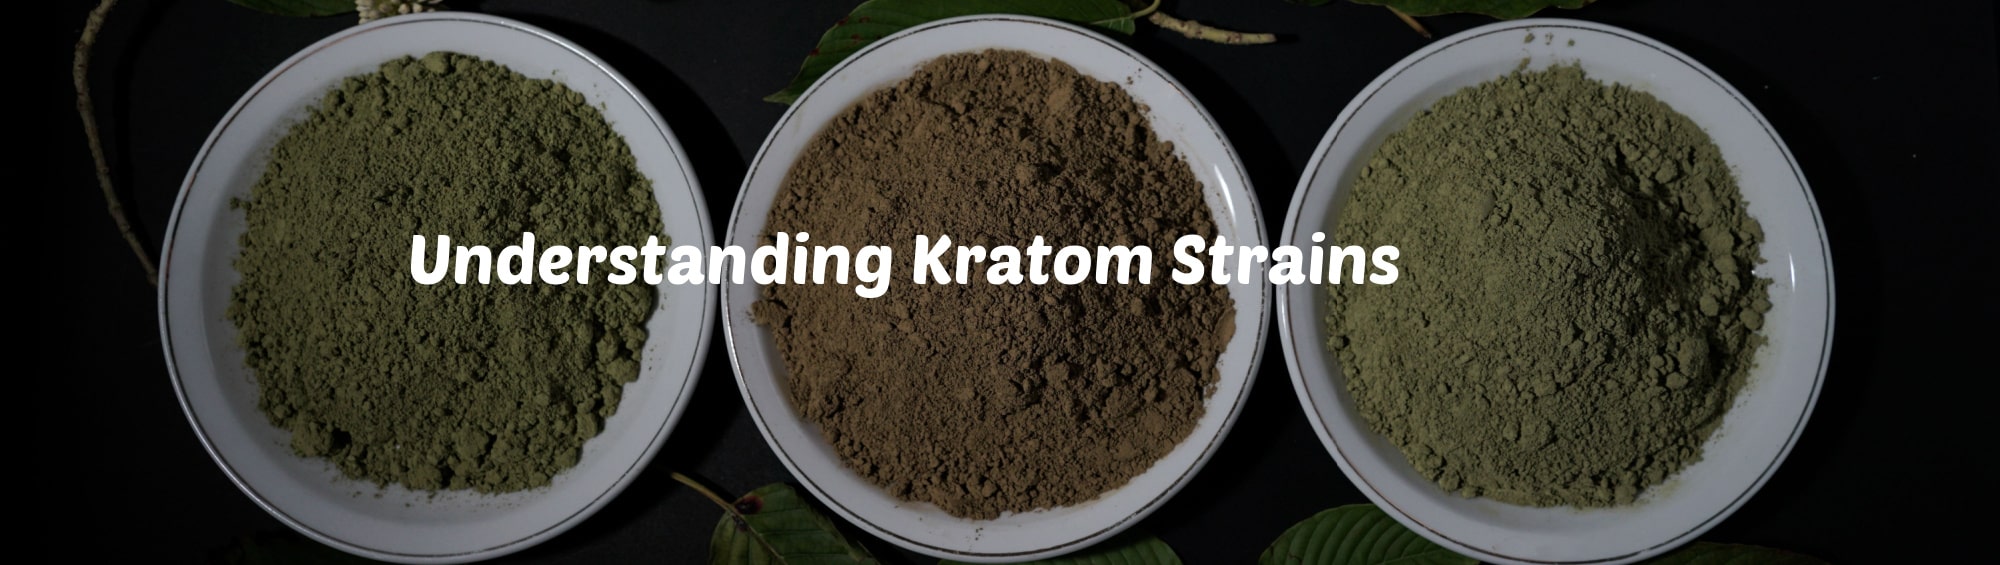 The Strongest Kratom Strain Guide: Top 3 Strains for Every Need